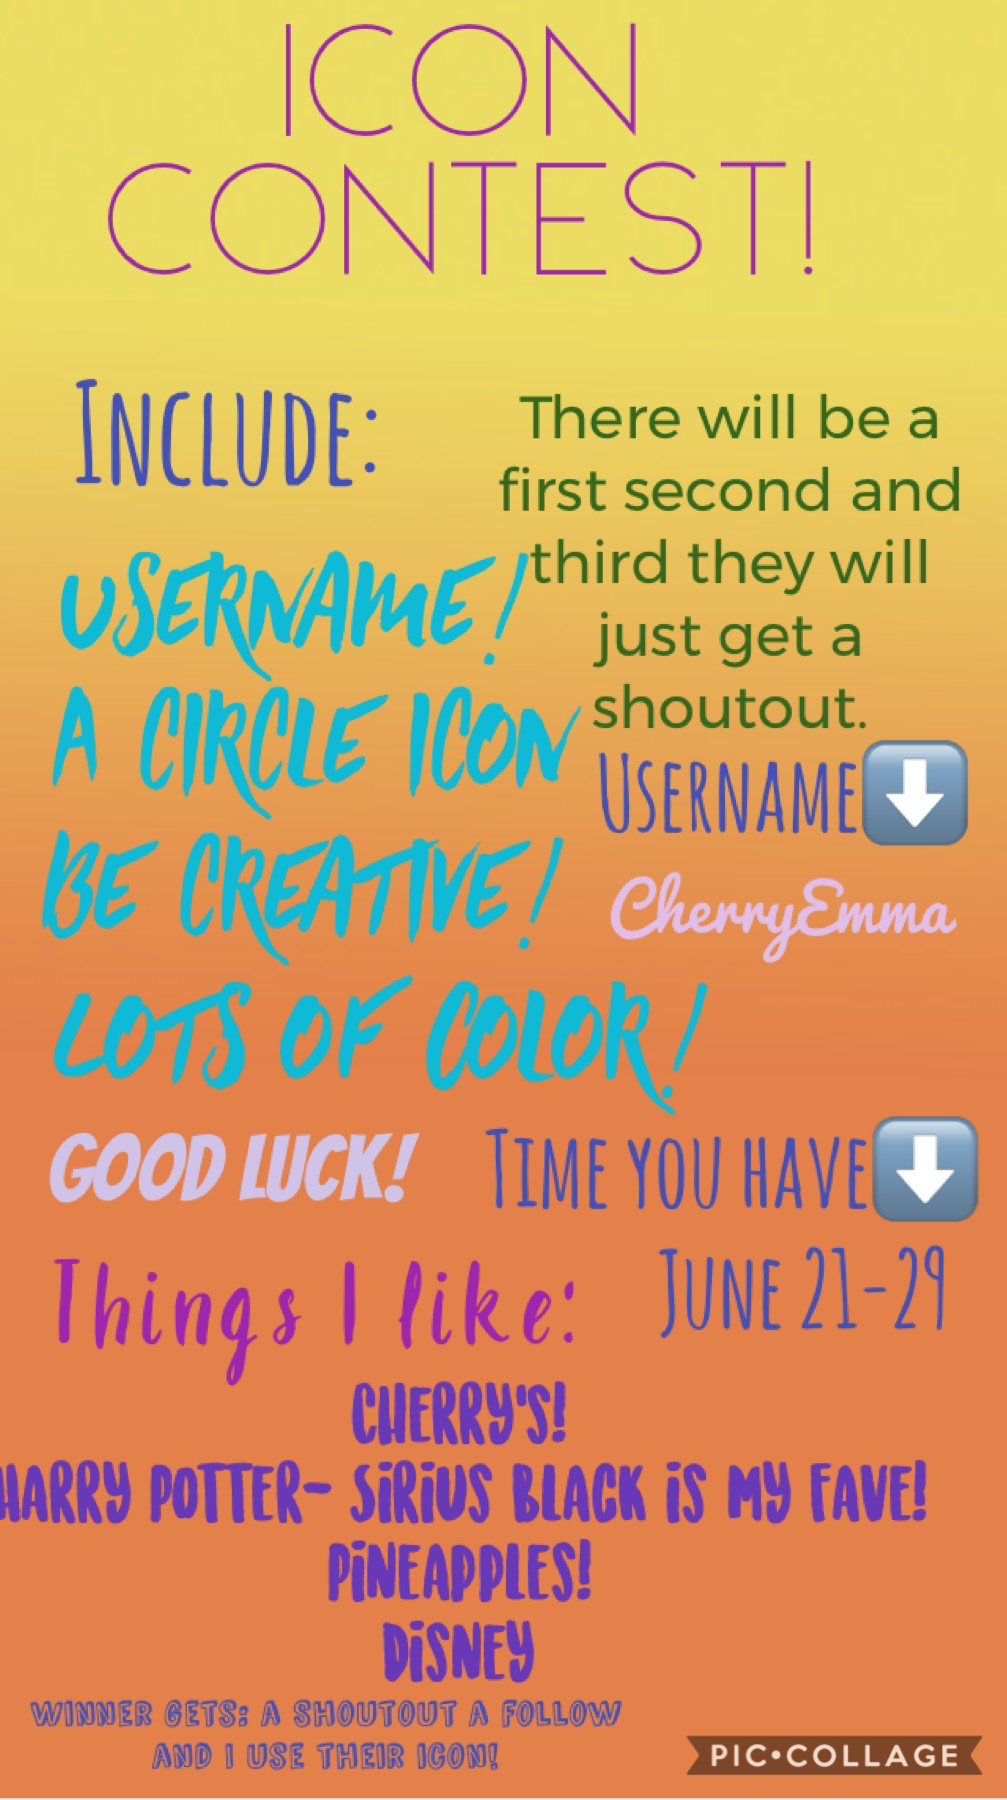 Tap!
Join my icon contest!
Have fun and good luck!
Winner gets prize! (Small print at the bottom)-CherryEmma